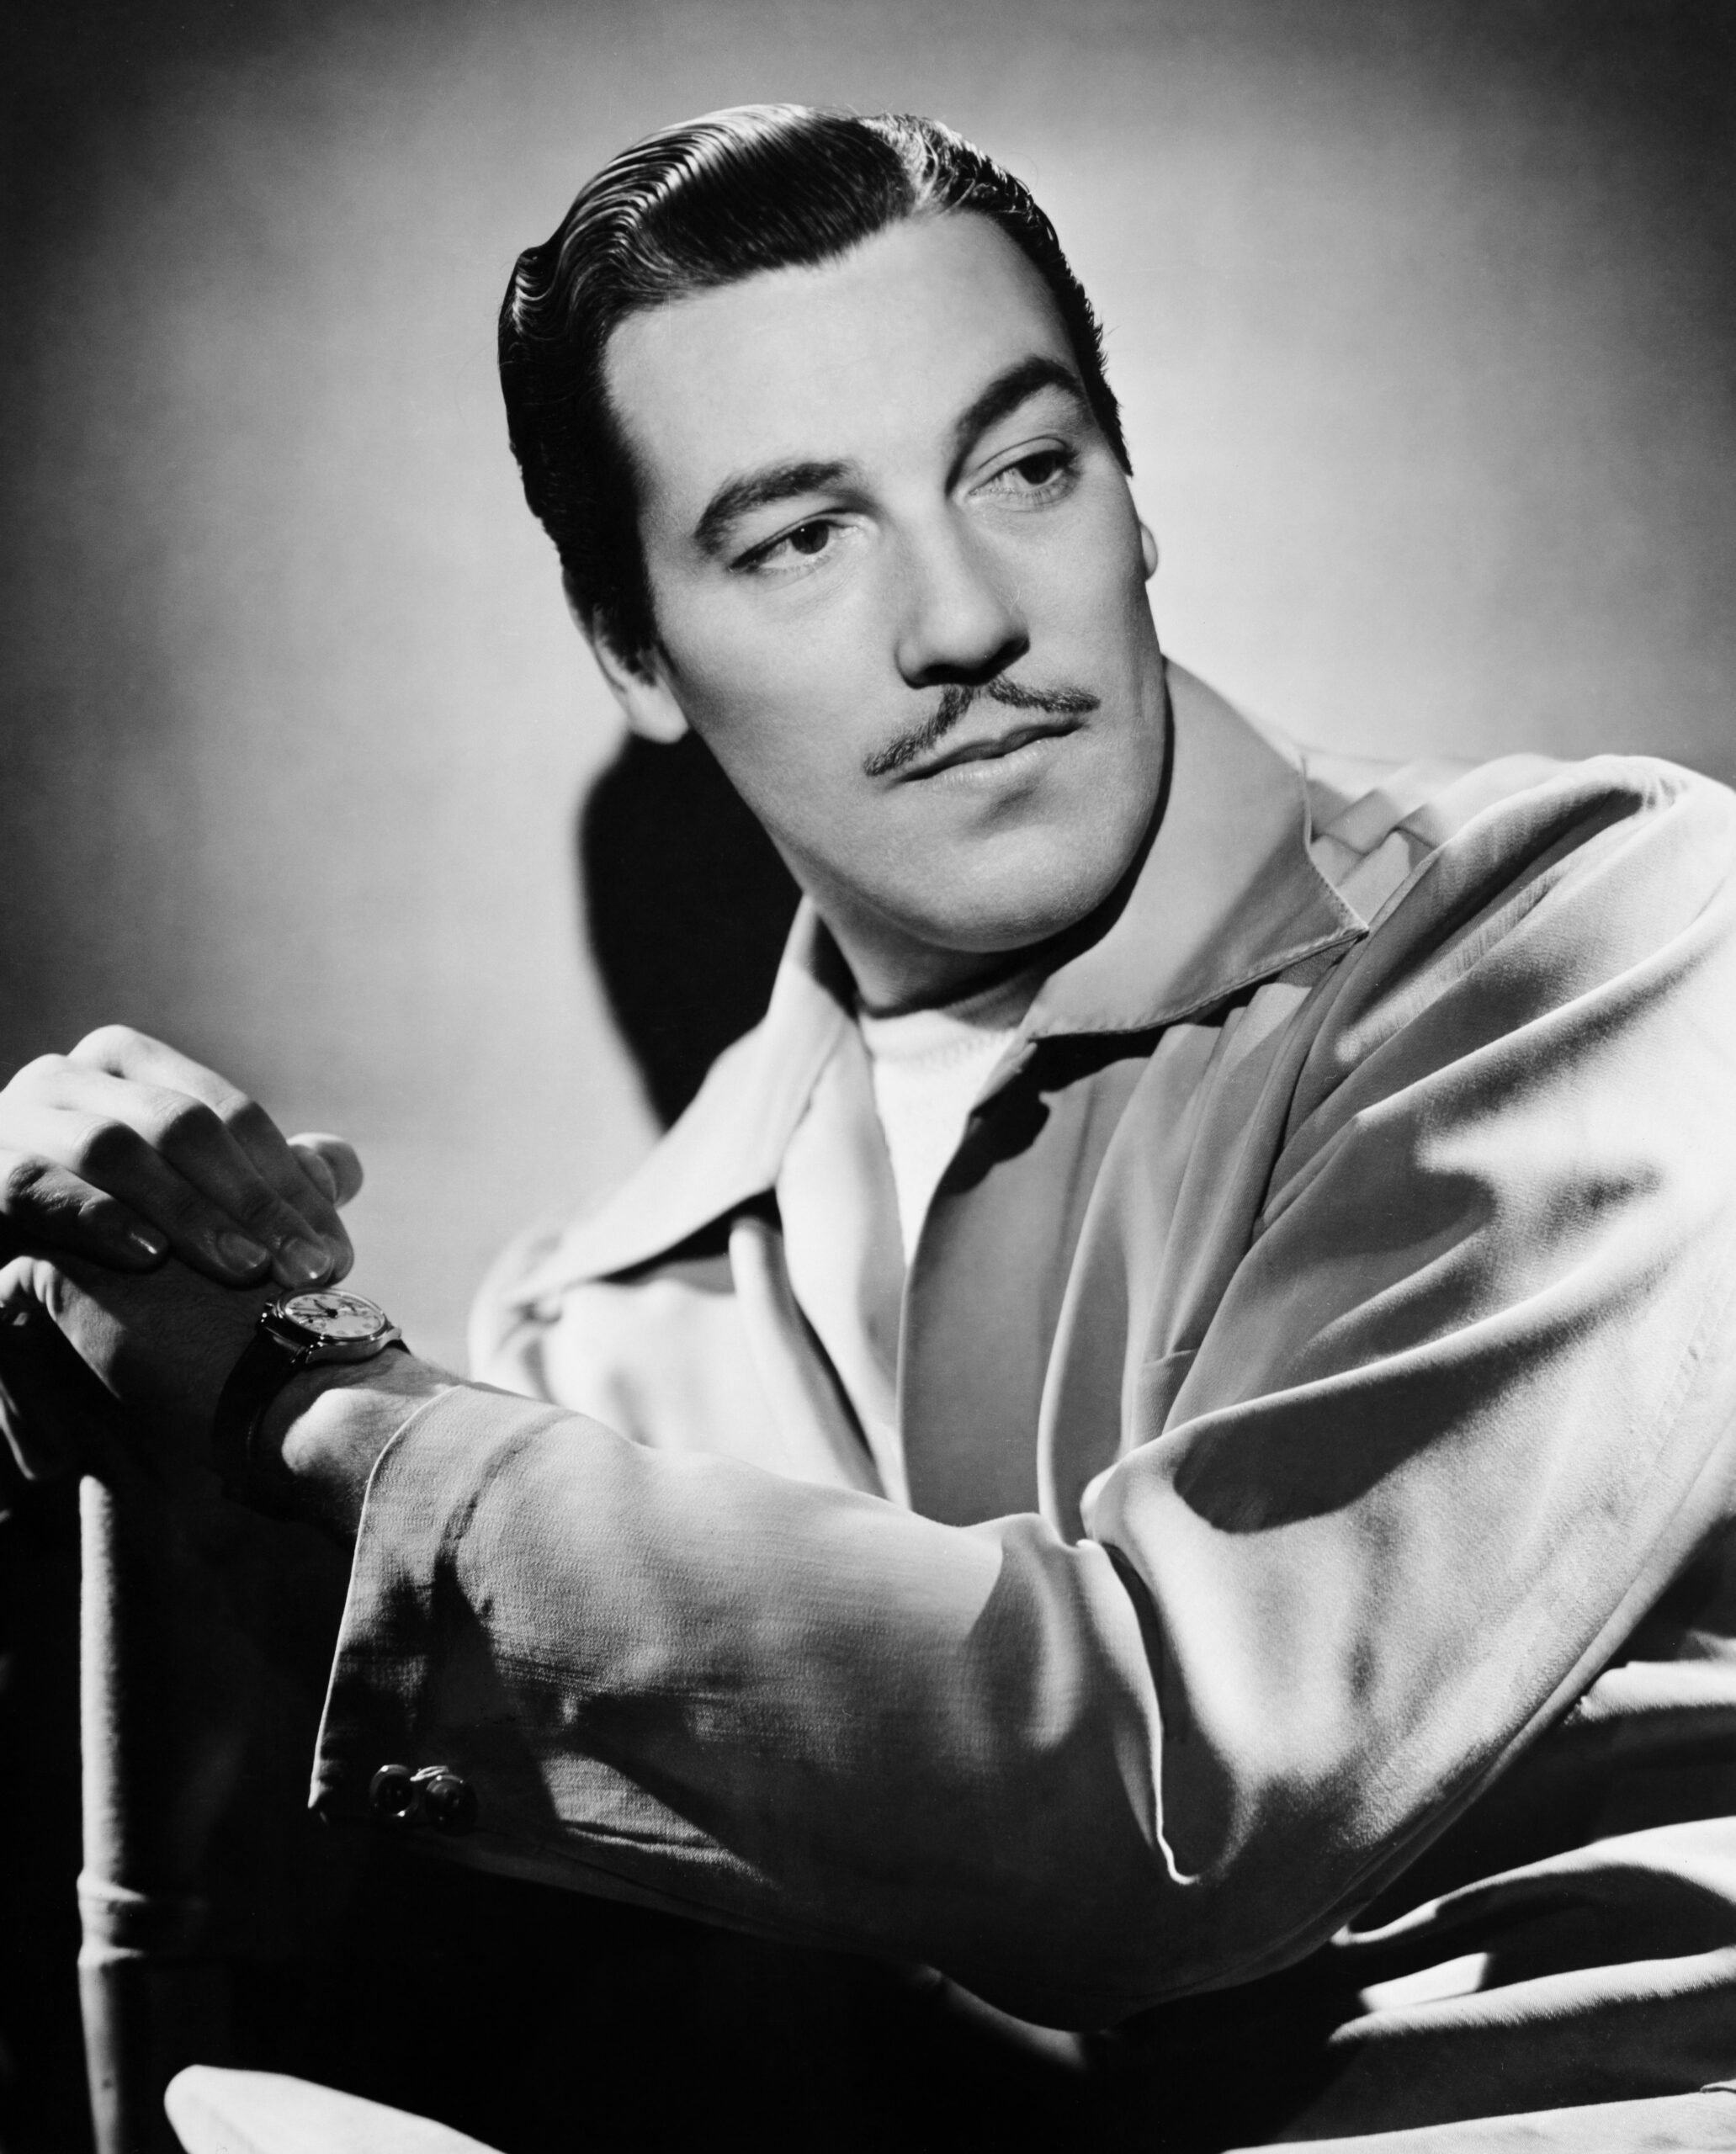 Cesar Romero, The Original Joker Who Refused To Shave His Mustache For The Role